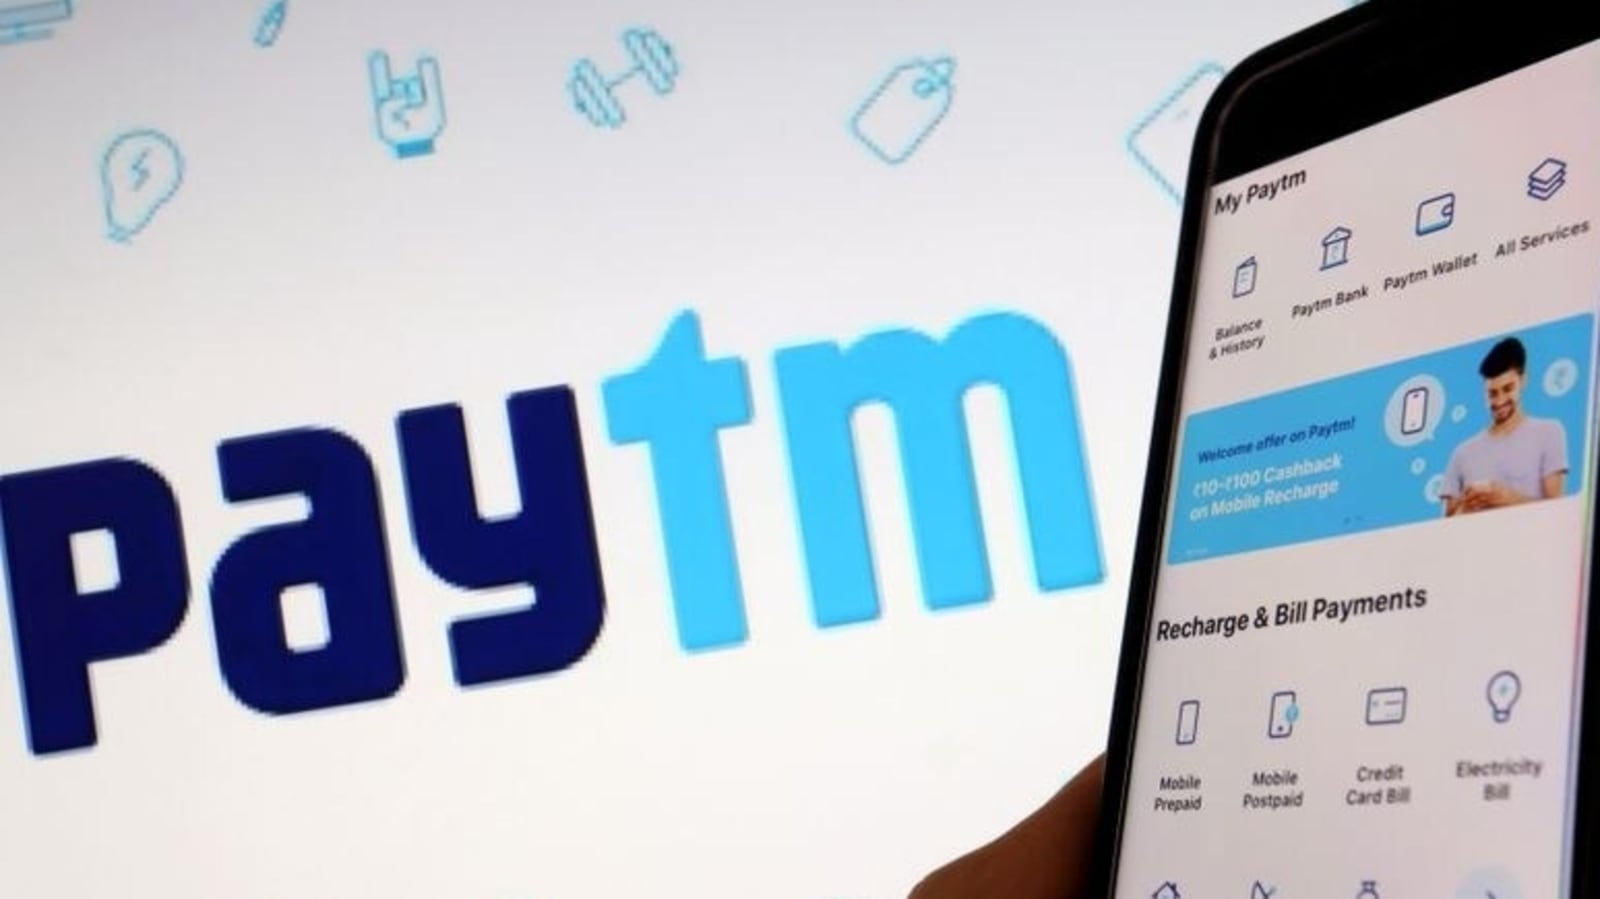 Paytm shares tumble for second day after IPO flop, market cap drops